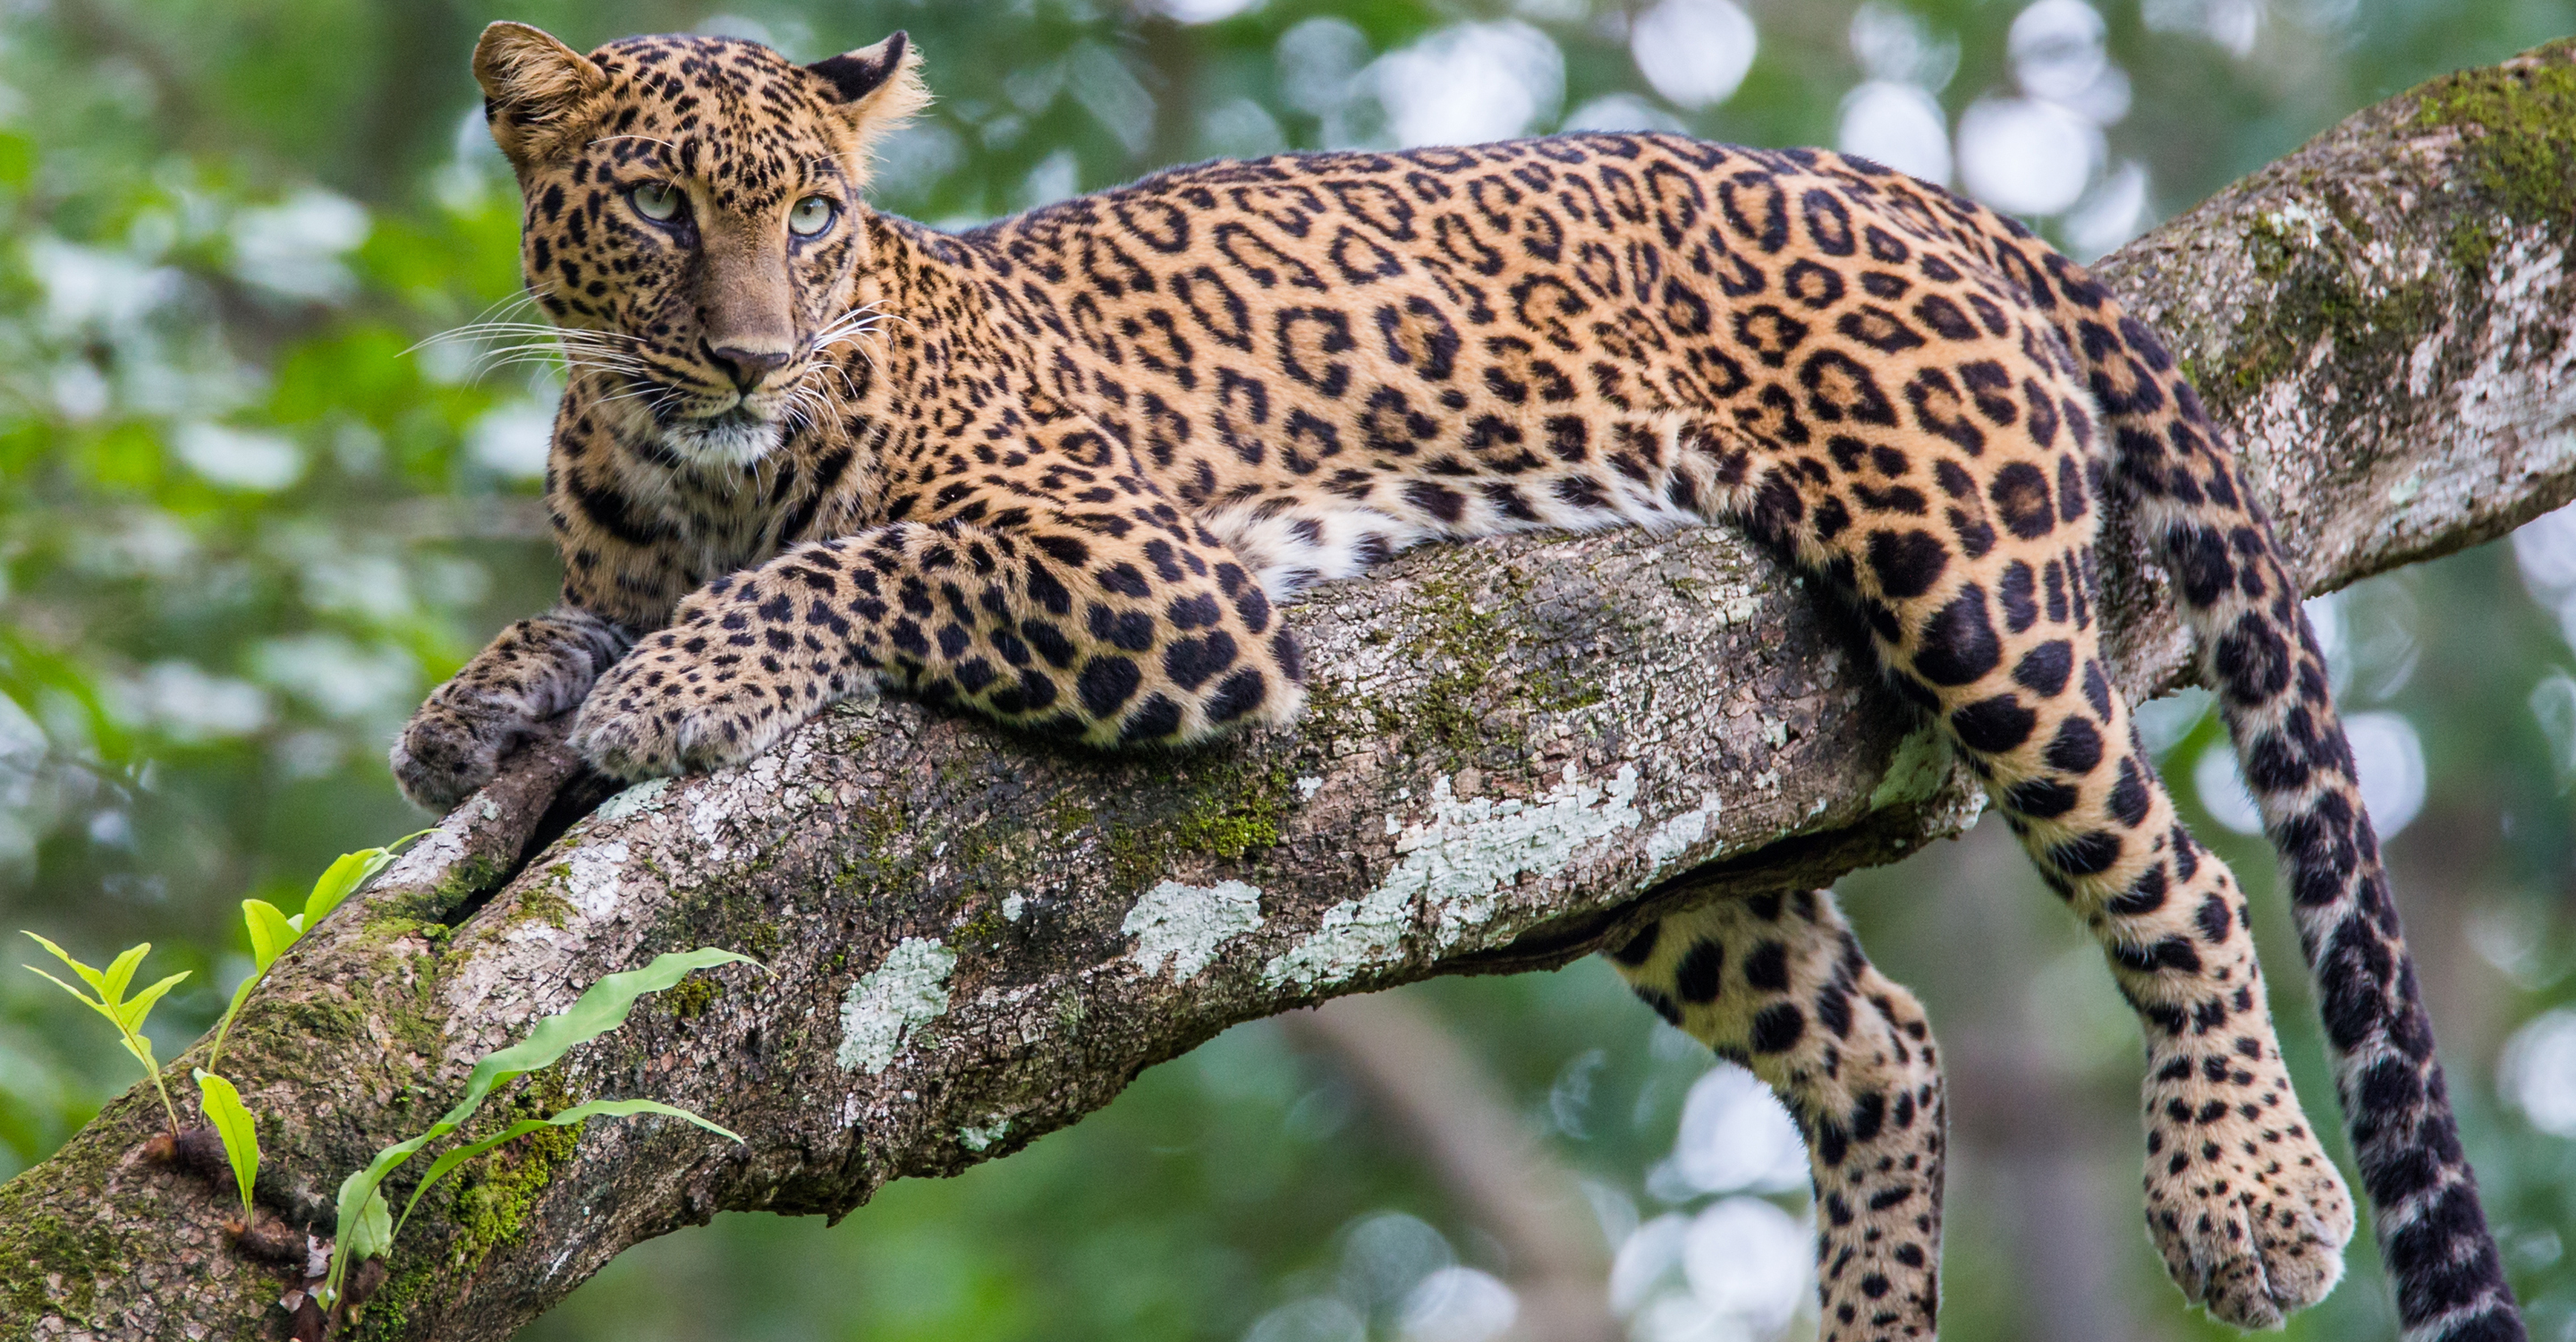 A leopard rests in a tree on a branch in Bandhavgarh National Park, India